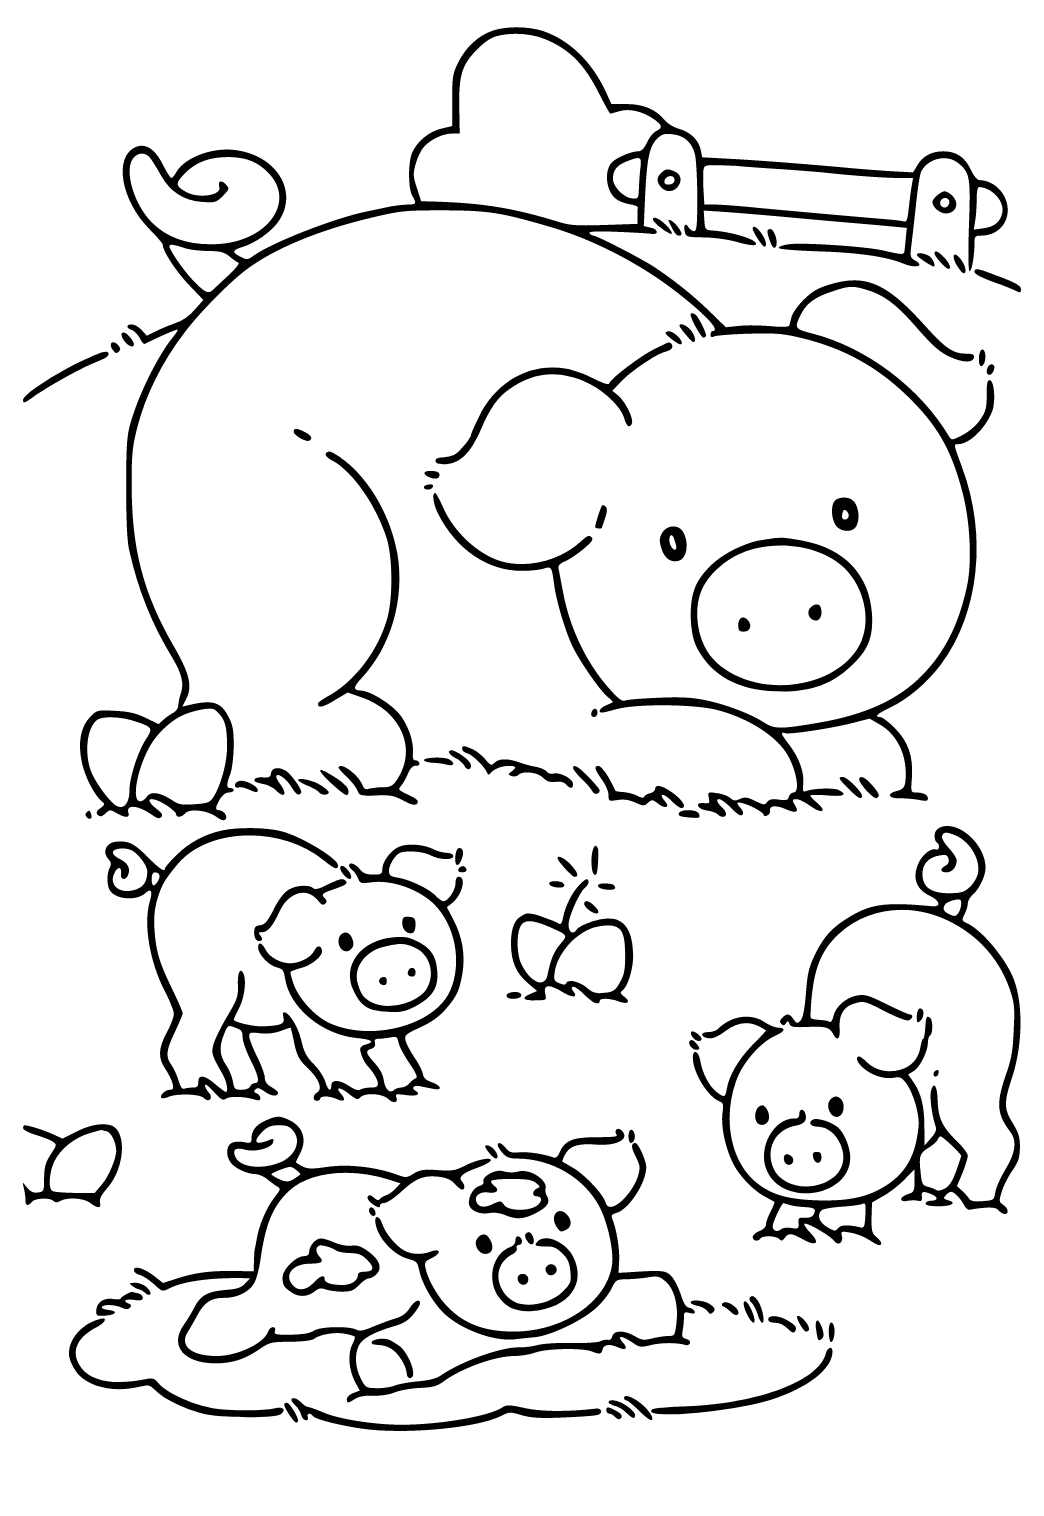 Free printable pig family coloring page for adults and kids